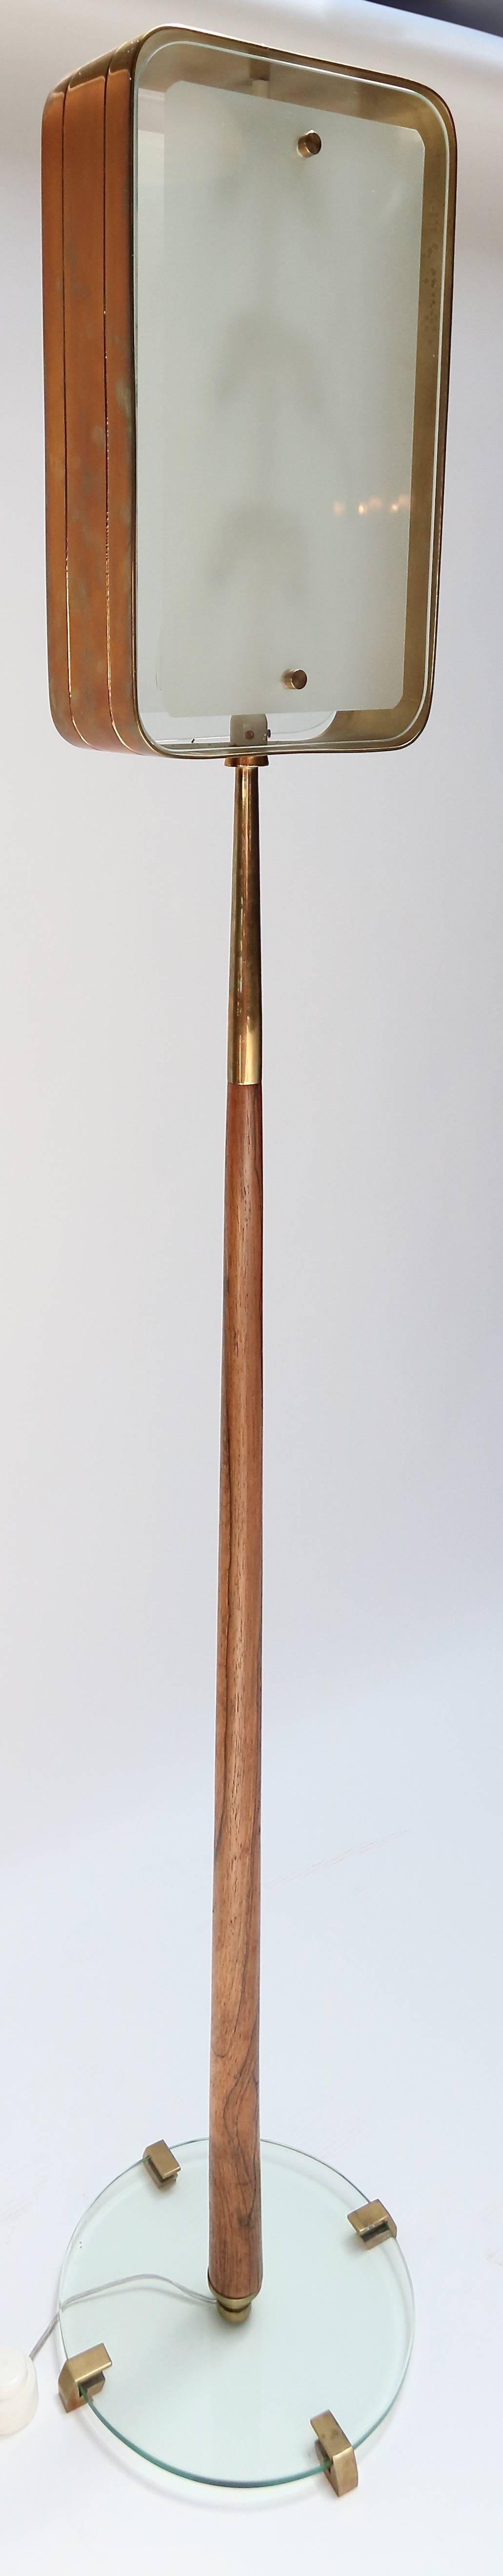 Floor lamp from the 1960s in the style of Fontana Arte with brass frame surrounding frosted glass and a wood and glass base. Lamp has six-light bulbs.